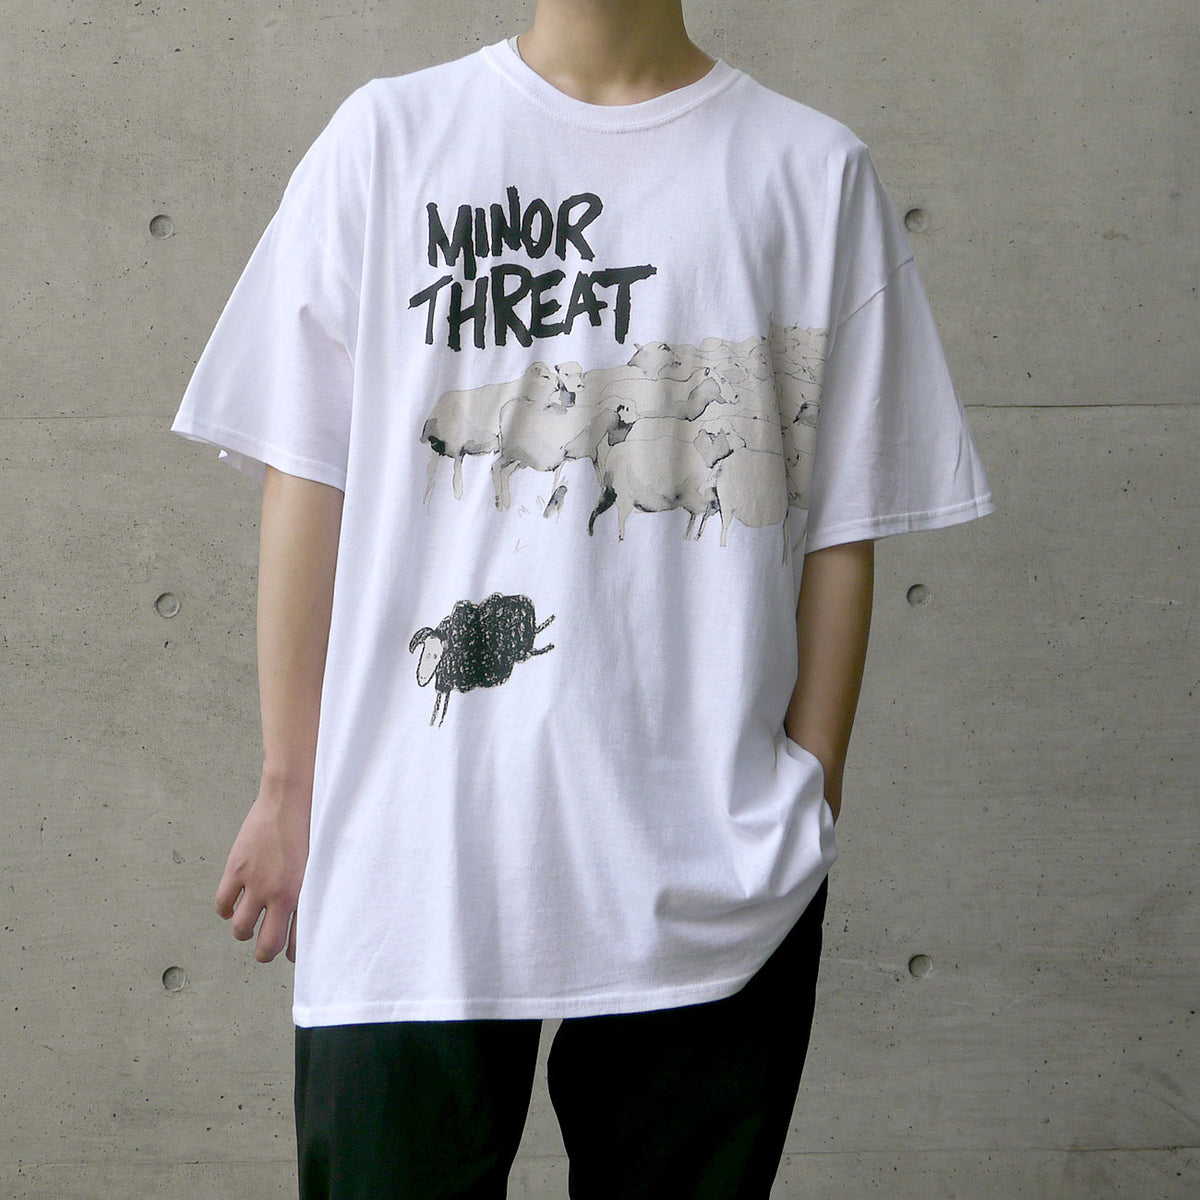 00's MINOR THREAT out of step Tシャツ Lマイナースレット